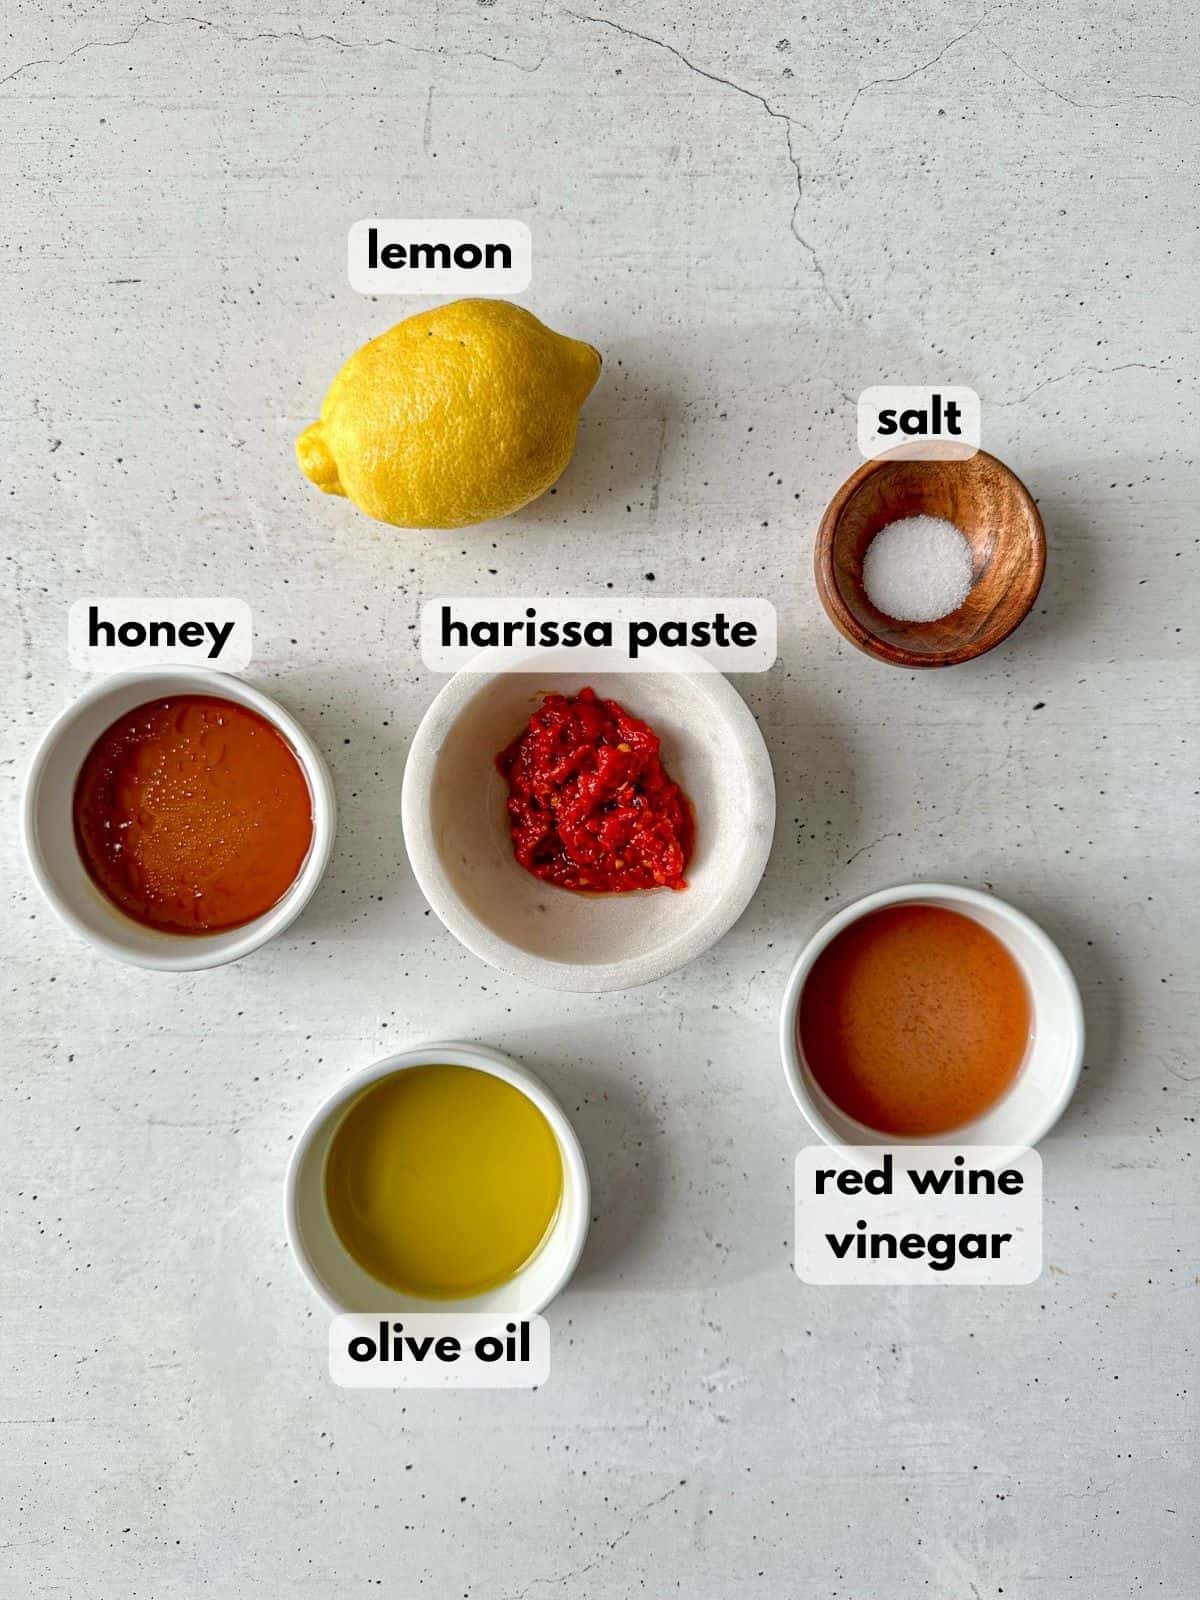 Ingredients needed to make this recipe labeled and spread out on a countertop: harissa paste, olive oil, lemon, red wine vinegar, honey, and salt.